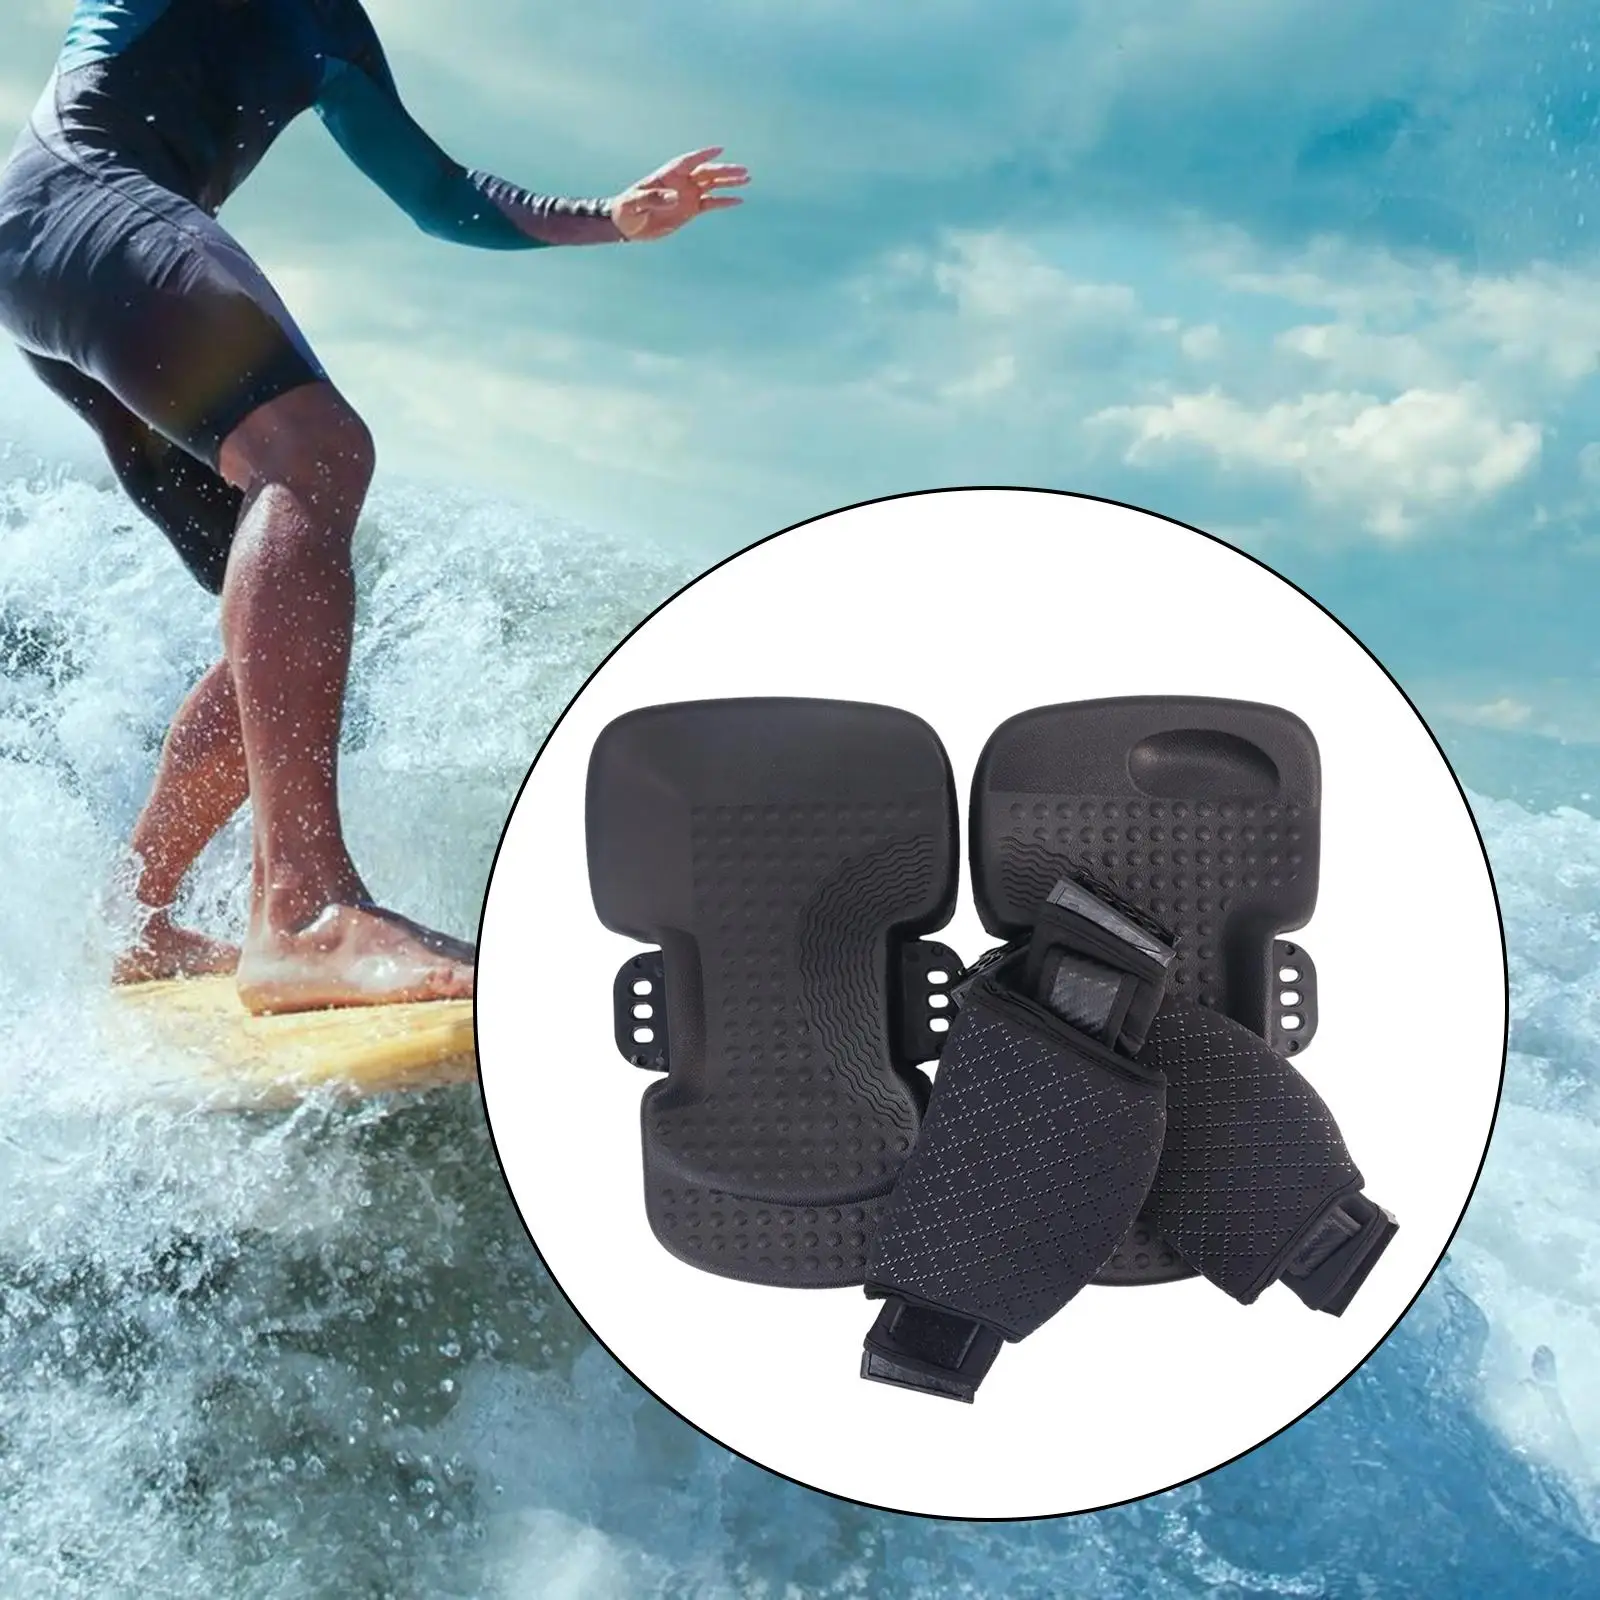 Rubber Kiteboard Boots Surf Board Foot Covers Adjustable AntiSlip Dot Design Sturdy 1 Pair Shoes Guard for Surf Board Outdoor